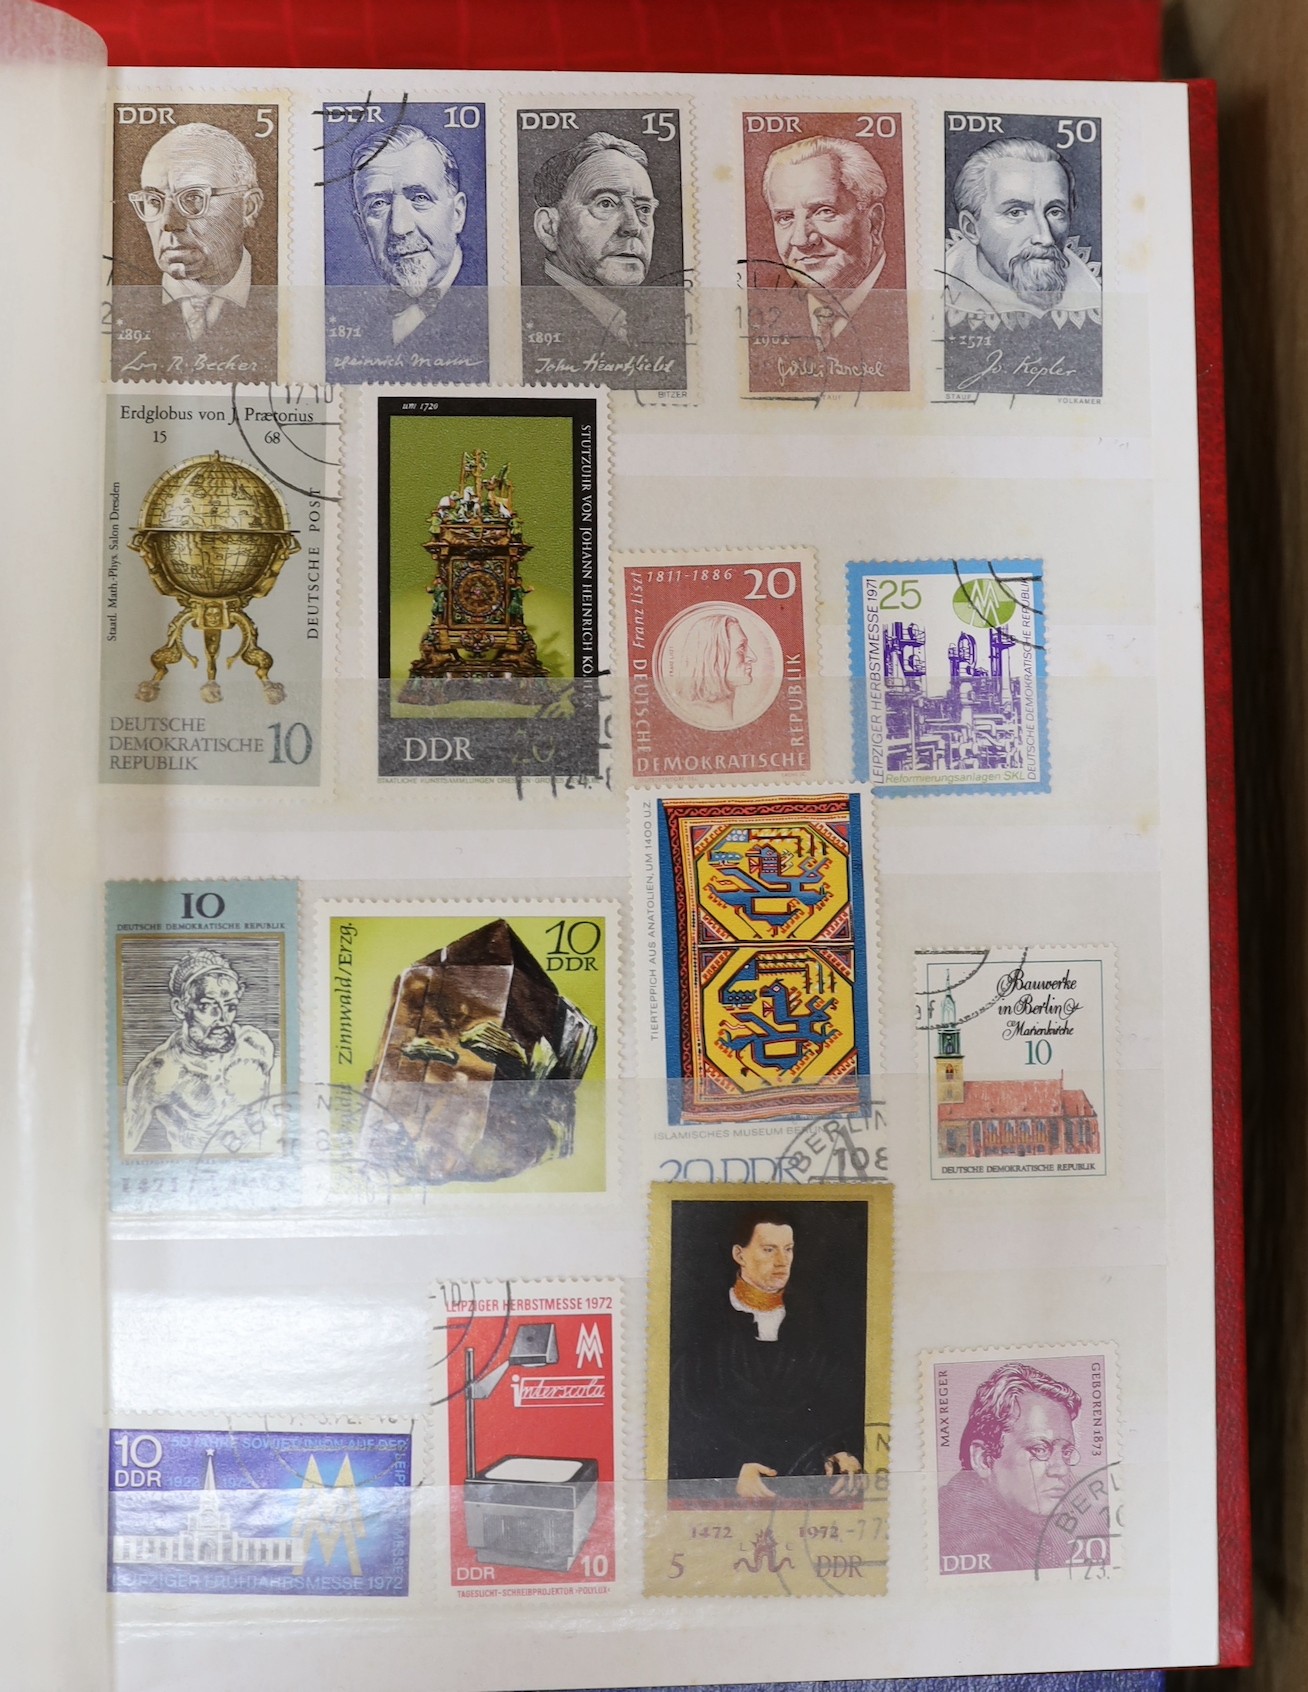 Four stock books of British stamps, QEII mint unused definitives and stamp books, some pre-decimal and two stock books of DDR used and mint unused stamps